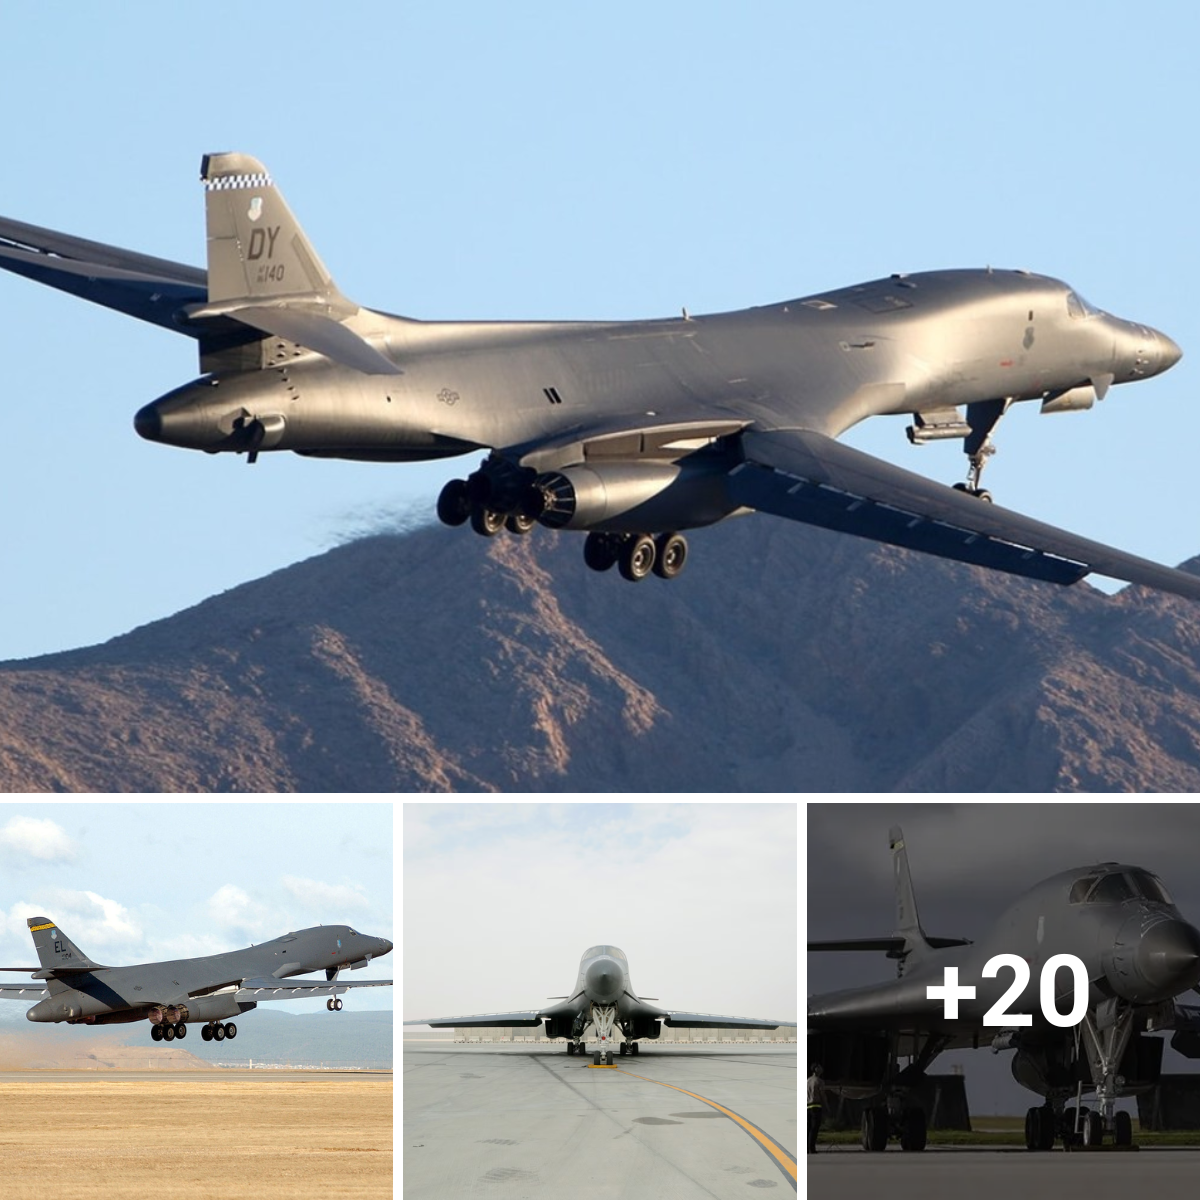 Decades of progress in strategic bombers are embodied in the power and technological display of a U.S. Air Force B-1B Lancer as it takes off.